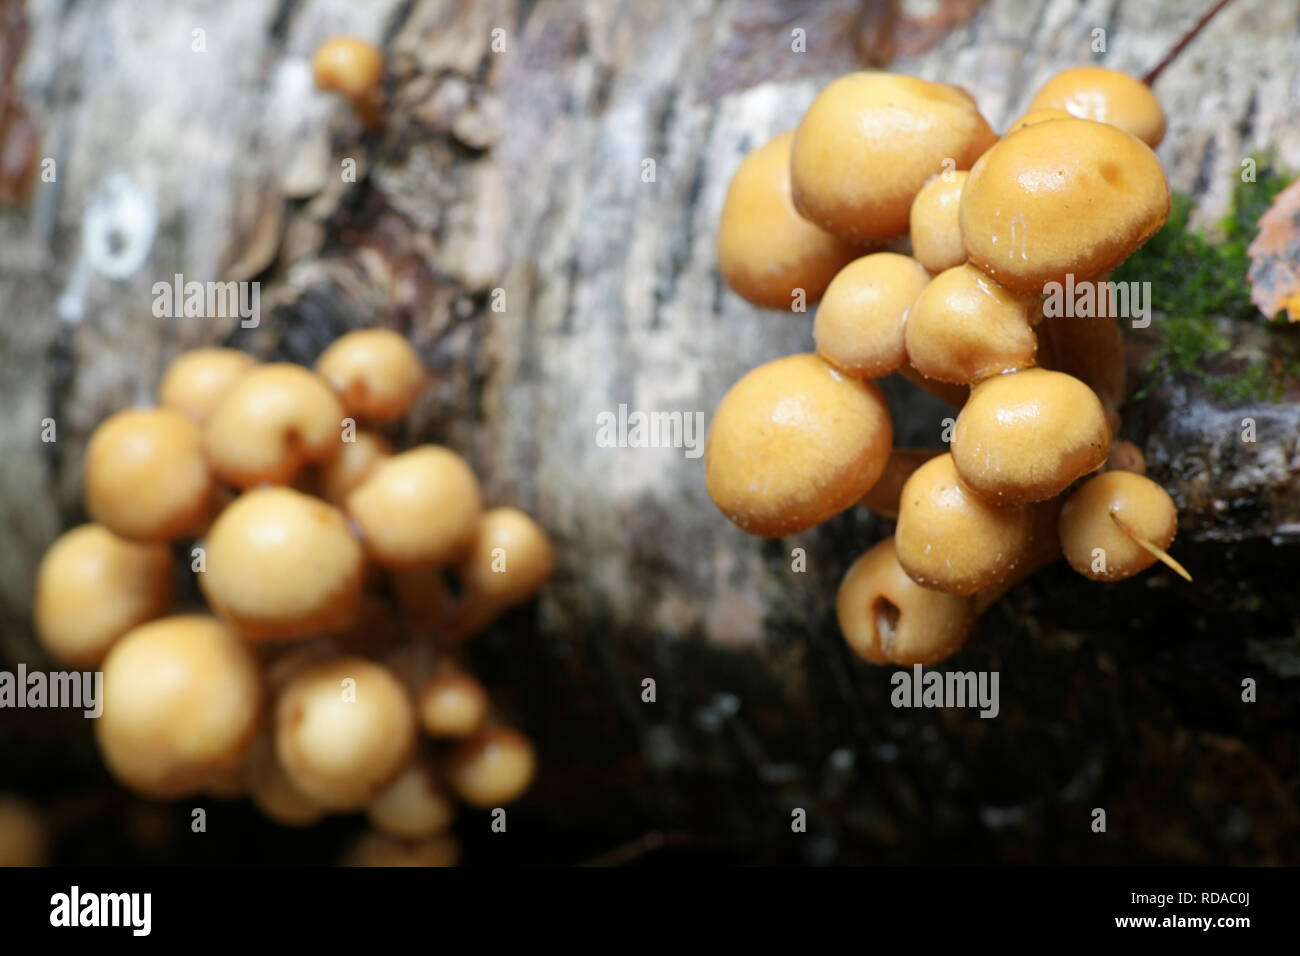 Kuehneromyces mutabilis (synonym: Pholiota mutabilis), commonly known as the sheathed woodtuft, an edible wild mushroom from Finland Stock Photo